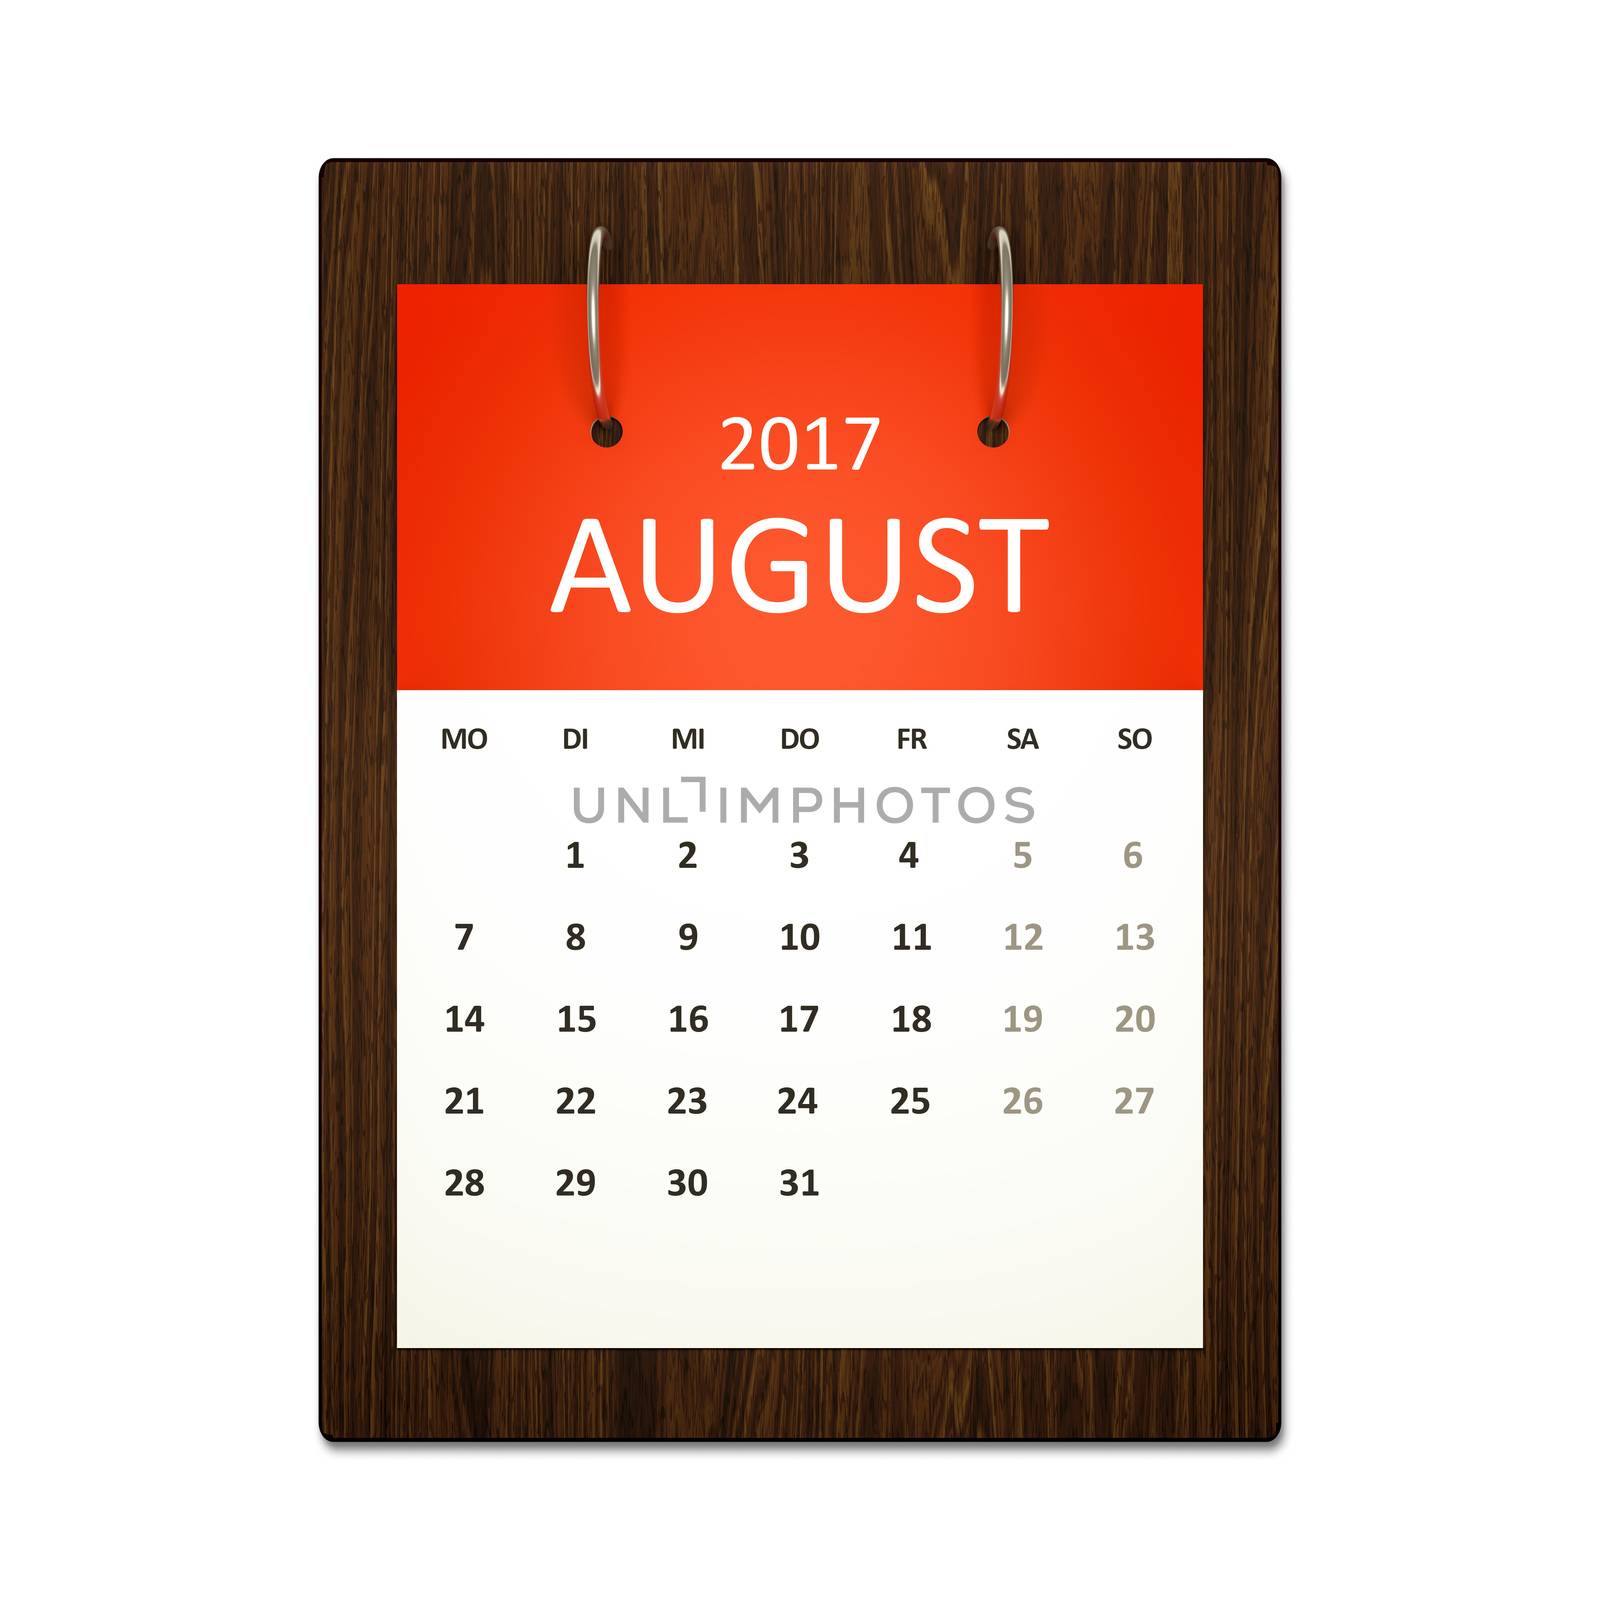 An image of a german calendar for event planning 2017 august